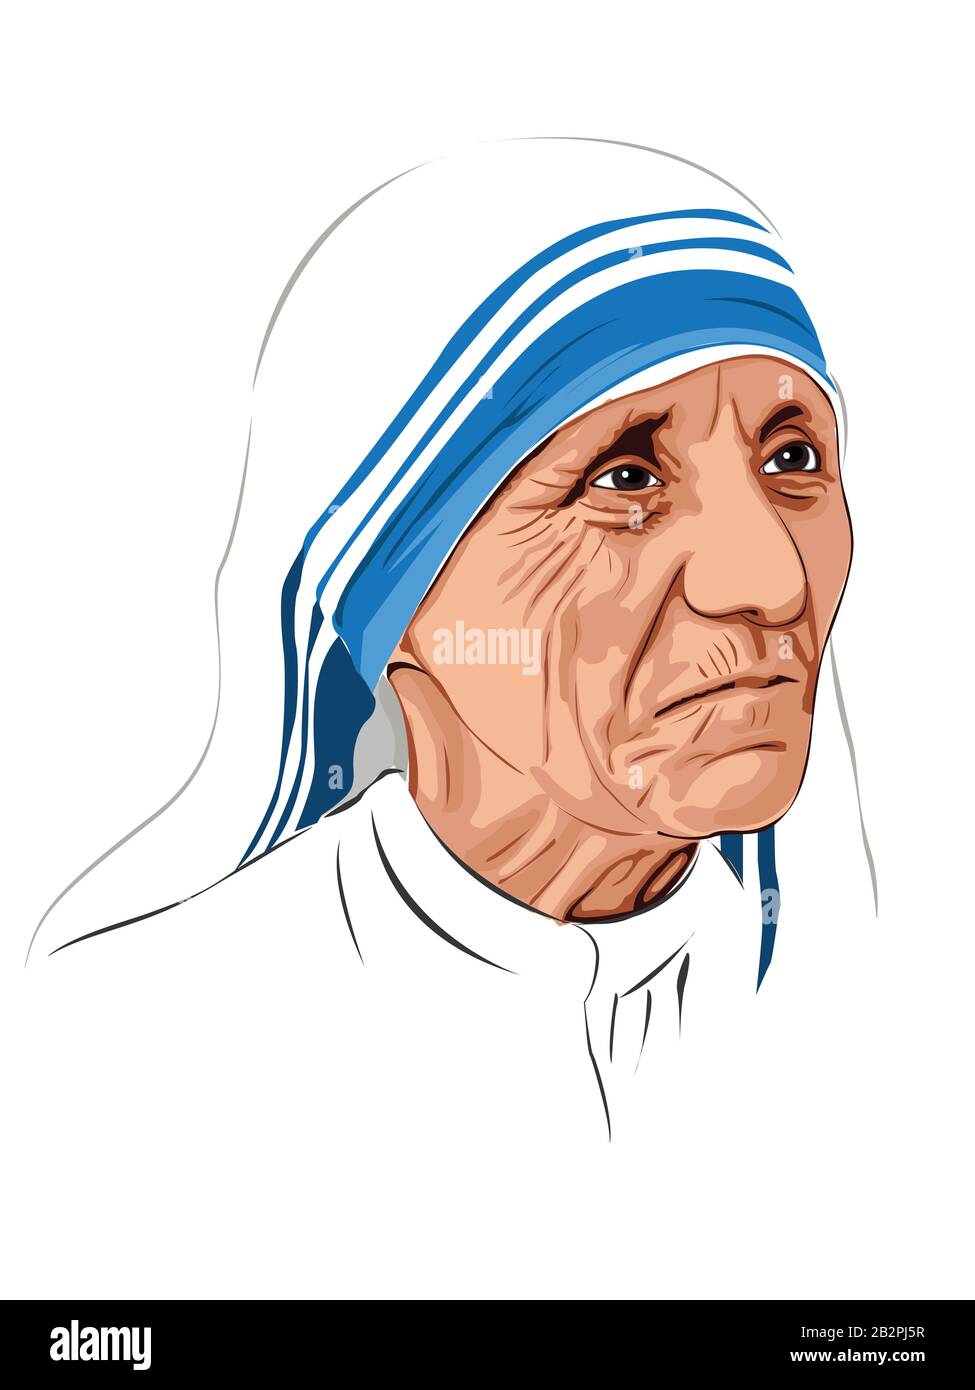 Mother Teresa, Saint Teresa was an Albanian-Indian Roman Catholic nun and missionary. Leader of Missionaries of Charity. Stock Vector